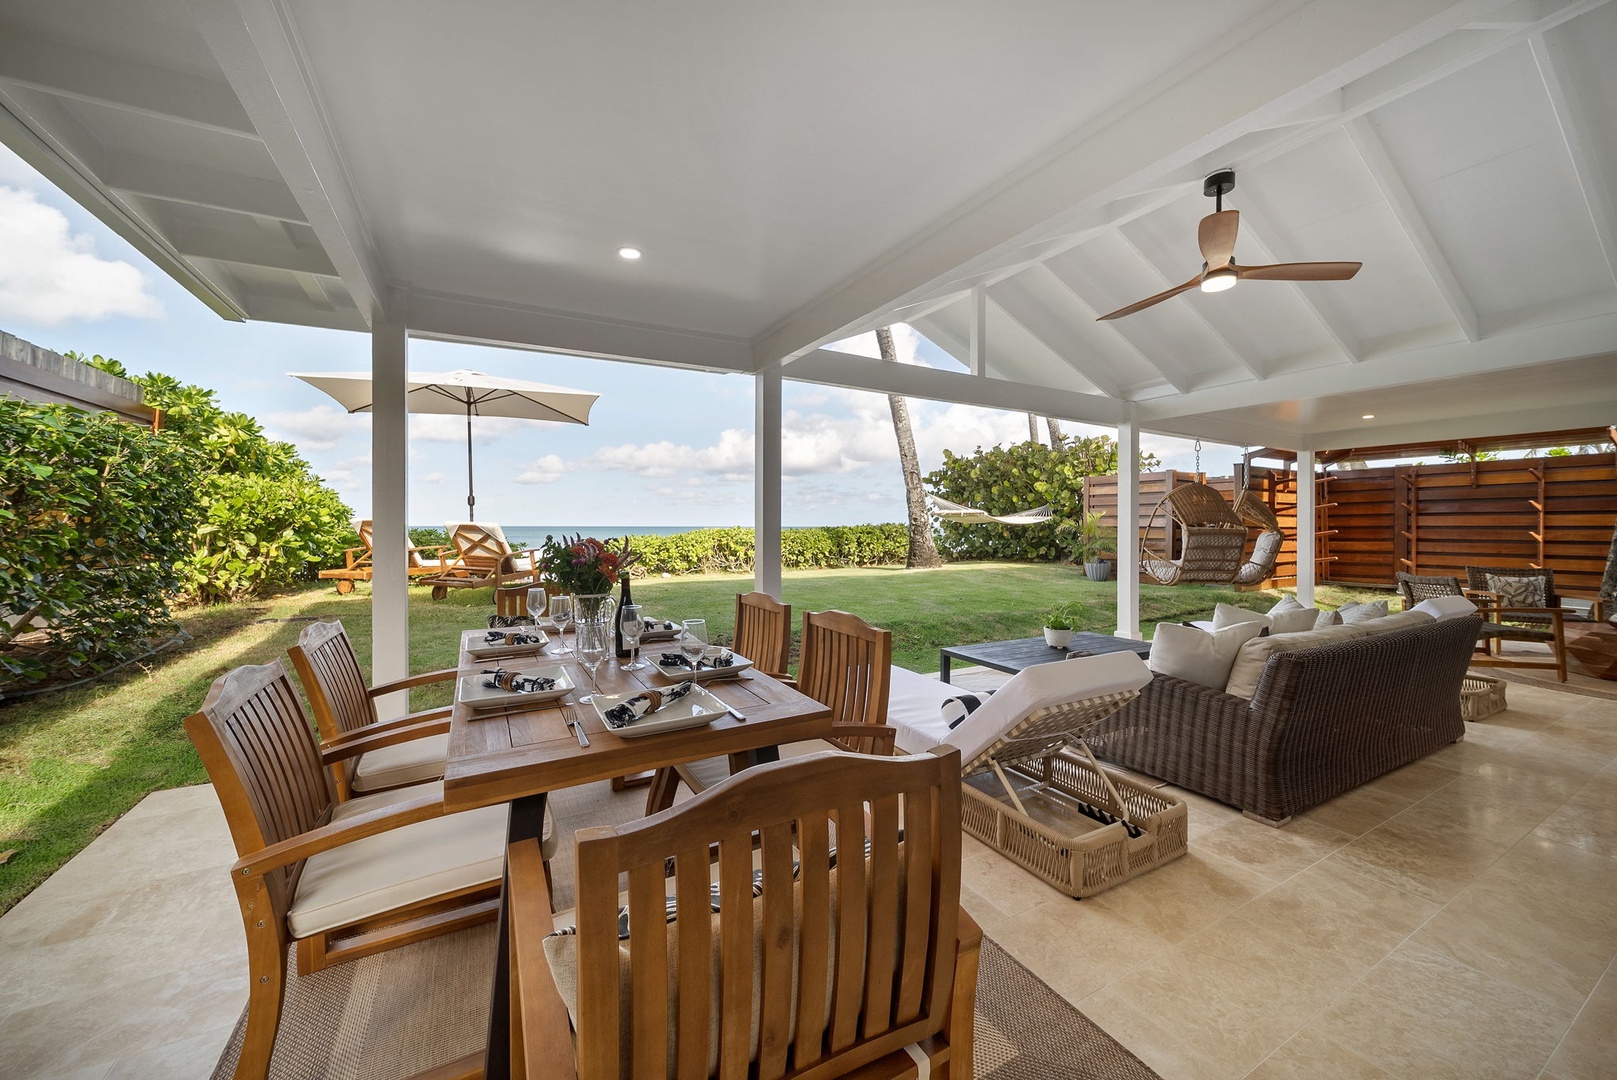 Haleiwa Vacation Rentals, Hale Nalu - The outdoor dining space downstairs has seating for 6